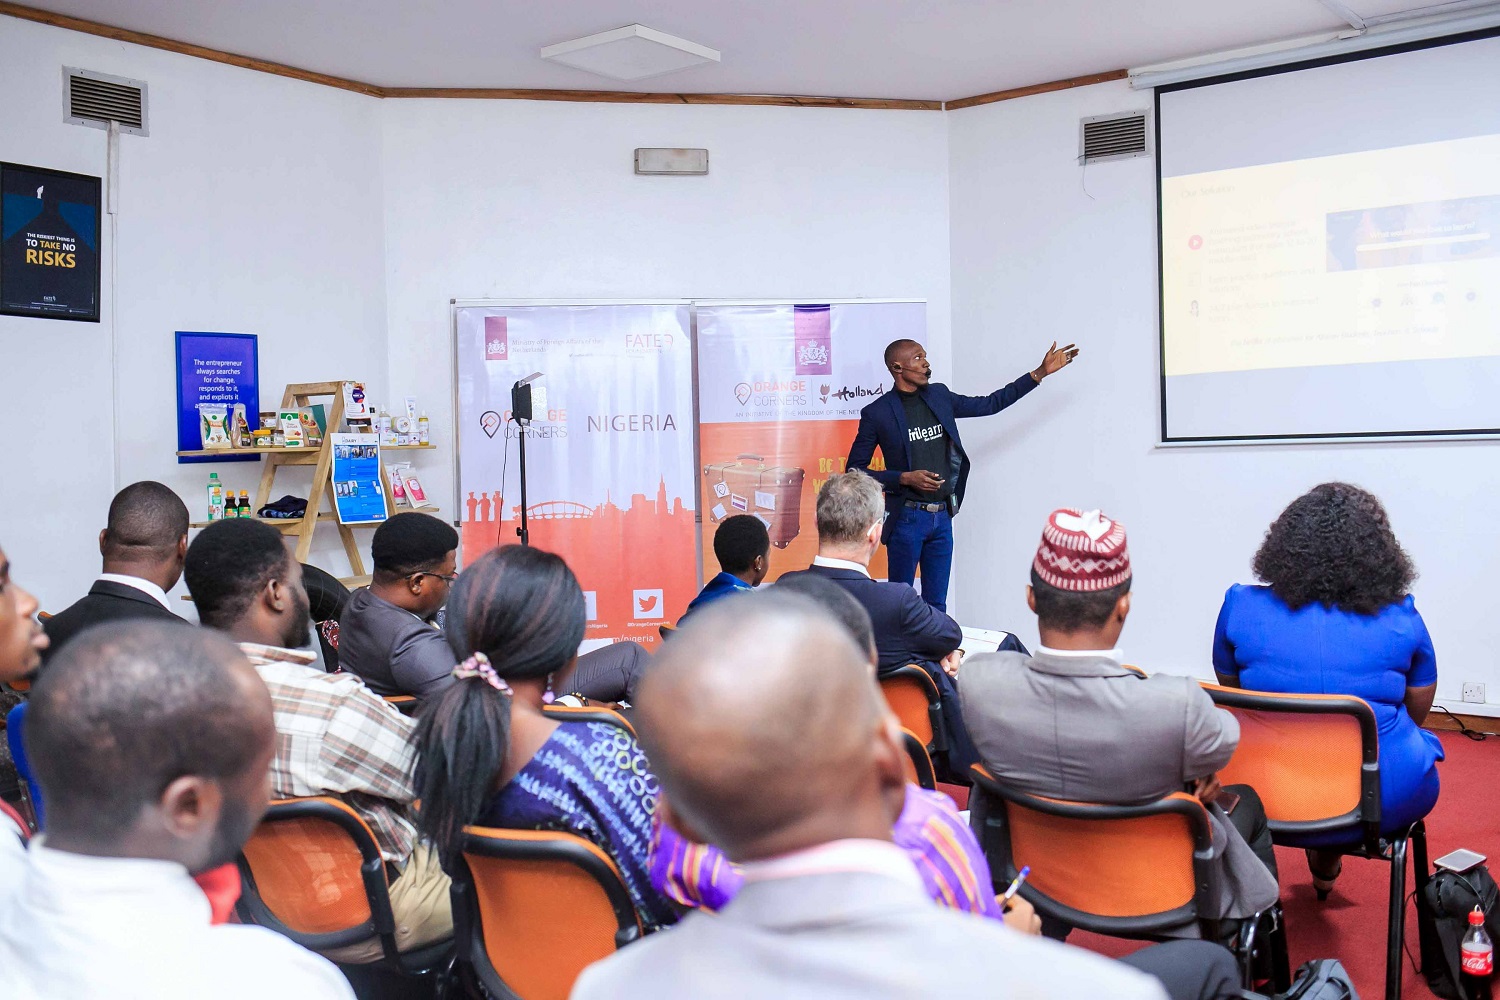 Young African entrepreneur founder pitching a startup business to investors